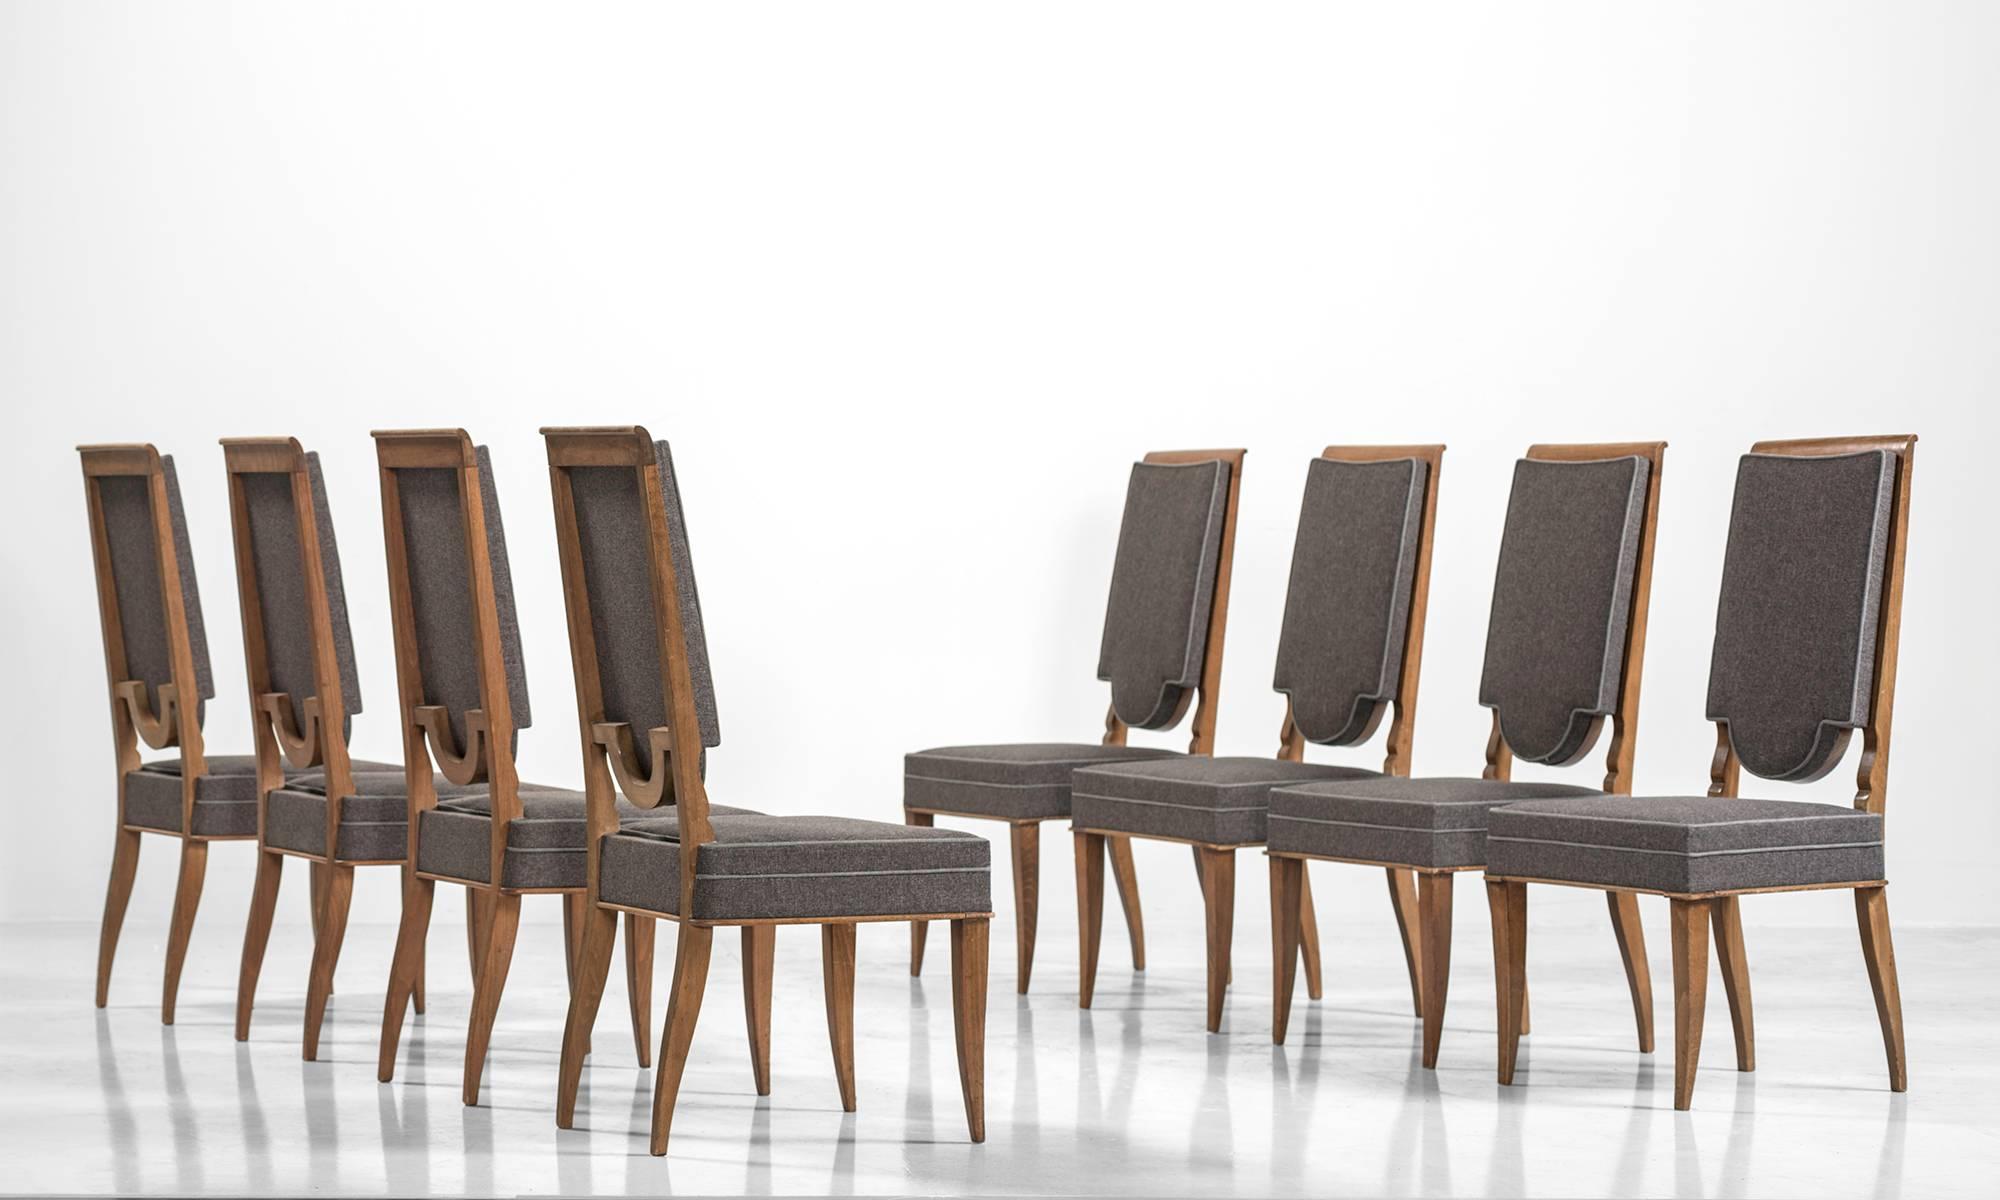 Set of eight beach dining chairs.